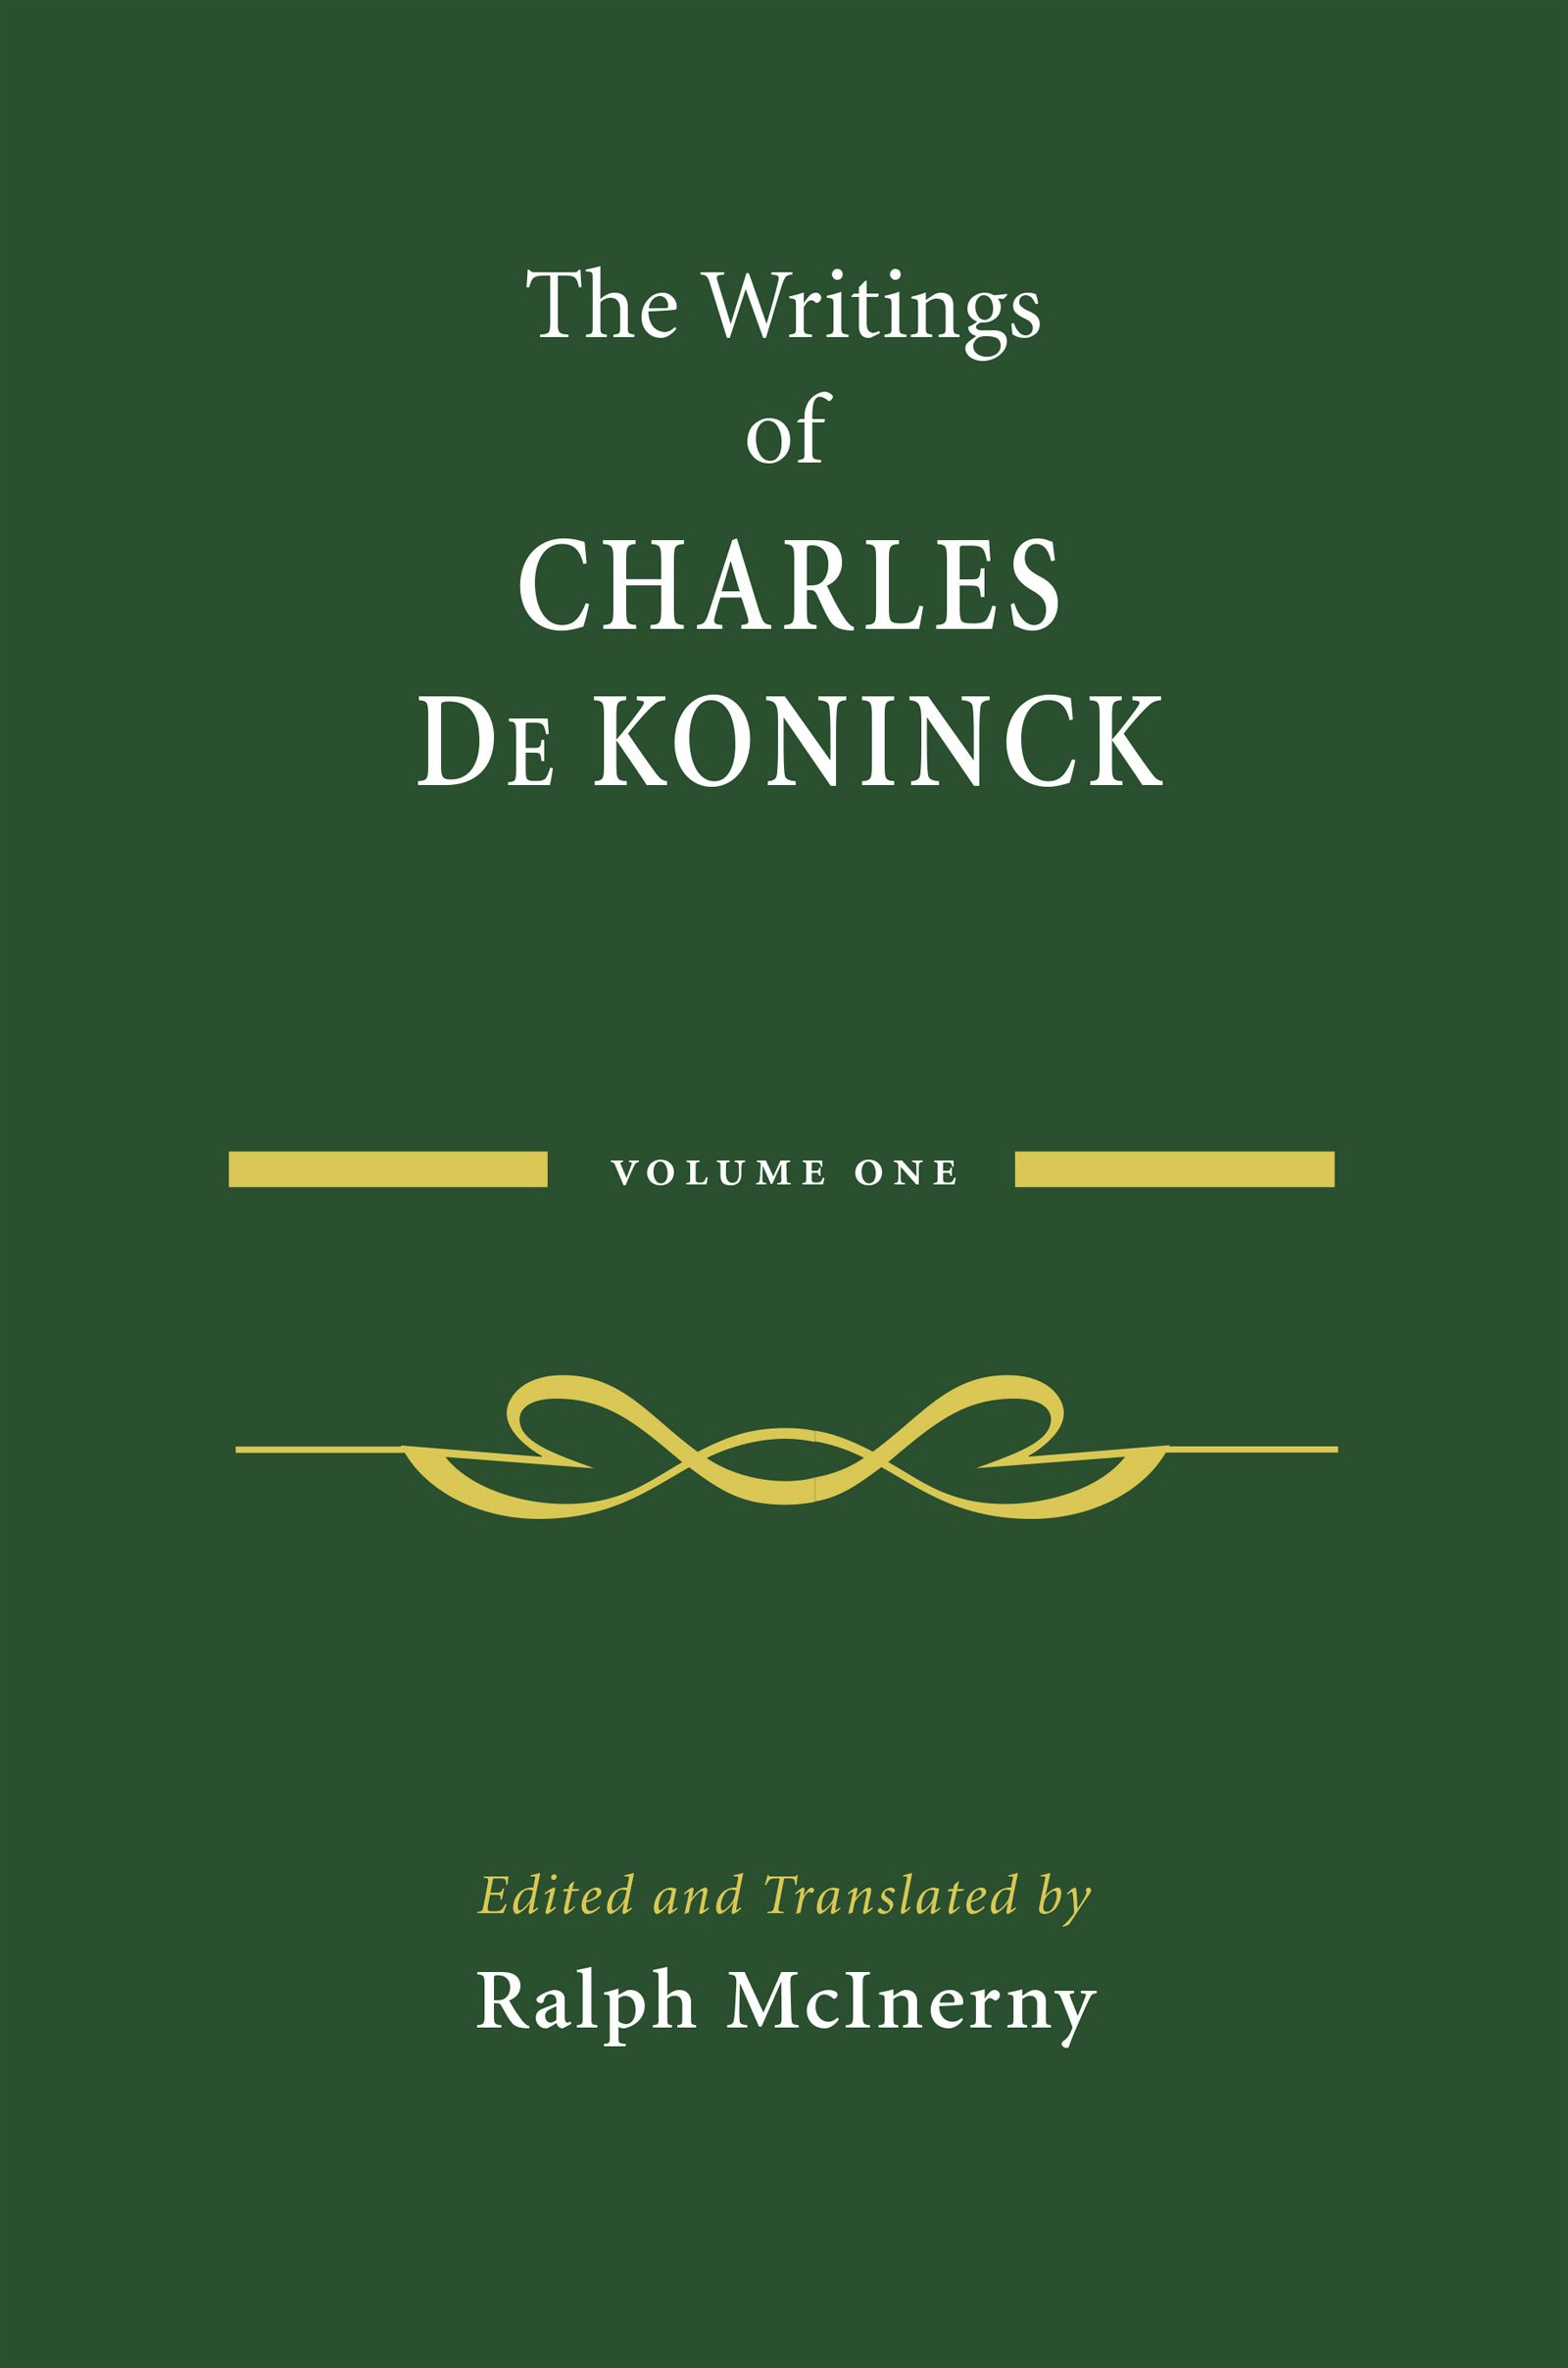 a history of knowledge by charles van doren pdf fre